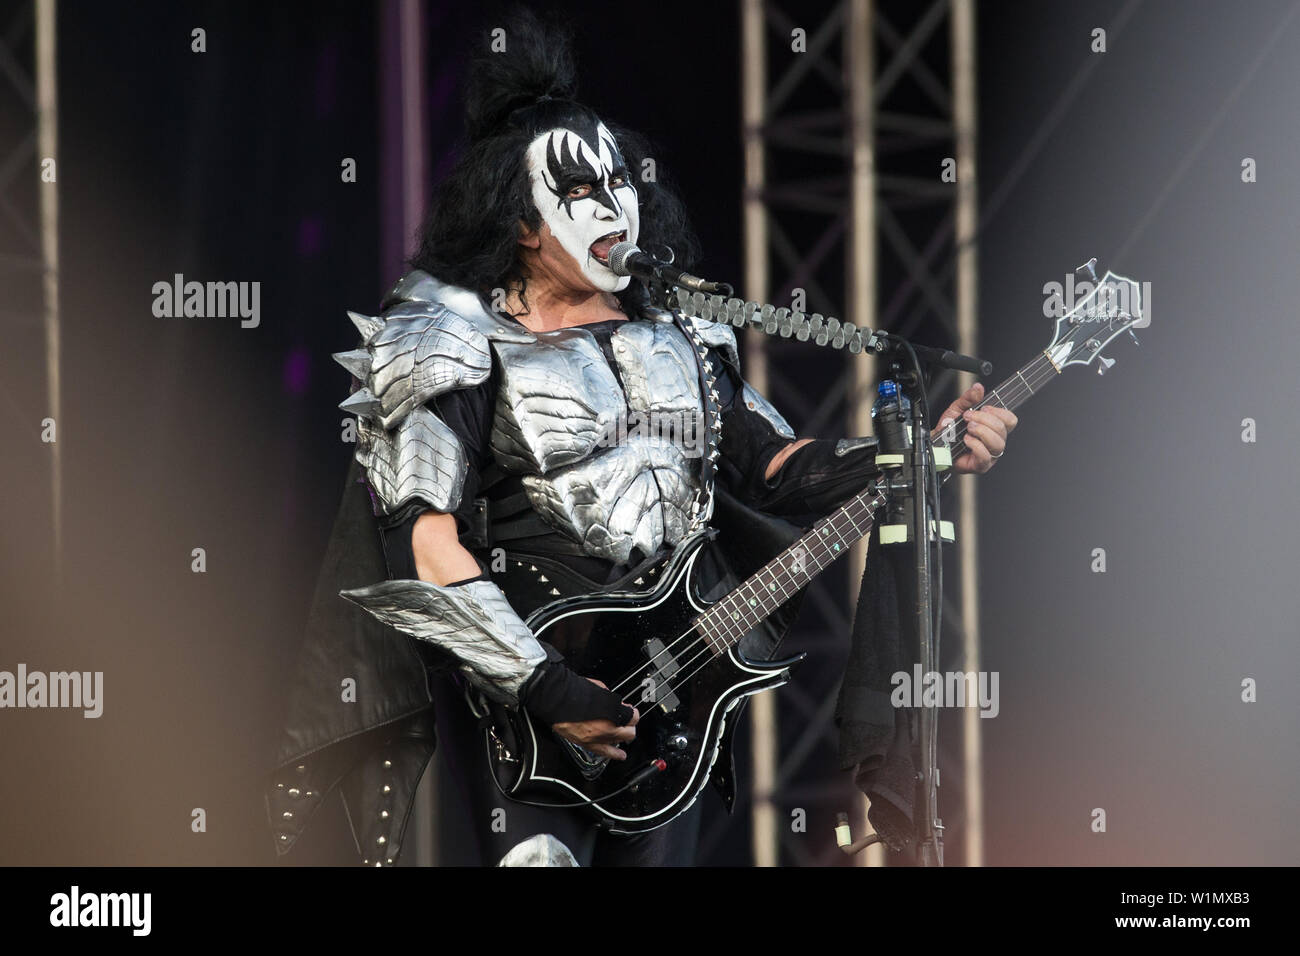 Oslo, Norway - June 27, 2019. The American rock band Kiss performs a live concert during the Norwegian music festival Tons of Rock 2019 in Oslo. Here vocalist and bass player Gene Simmons seen live on stage. (Photo credit: Gonzales Photo - Per-Otto Oppi). Stock Photo